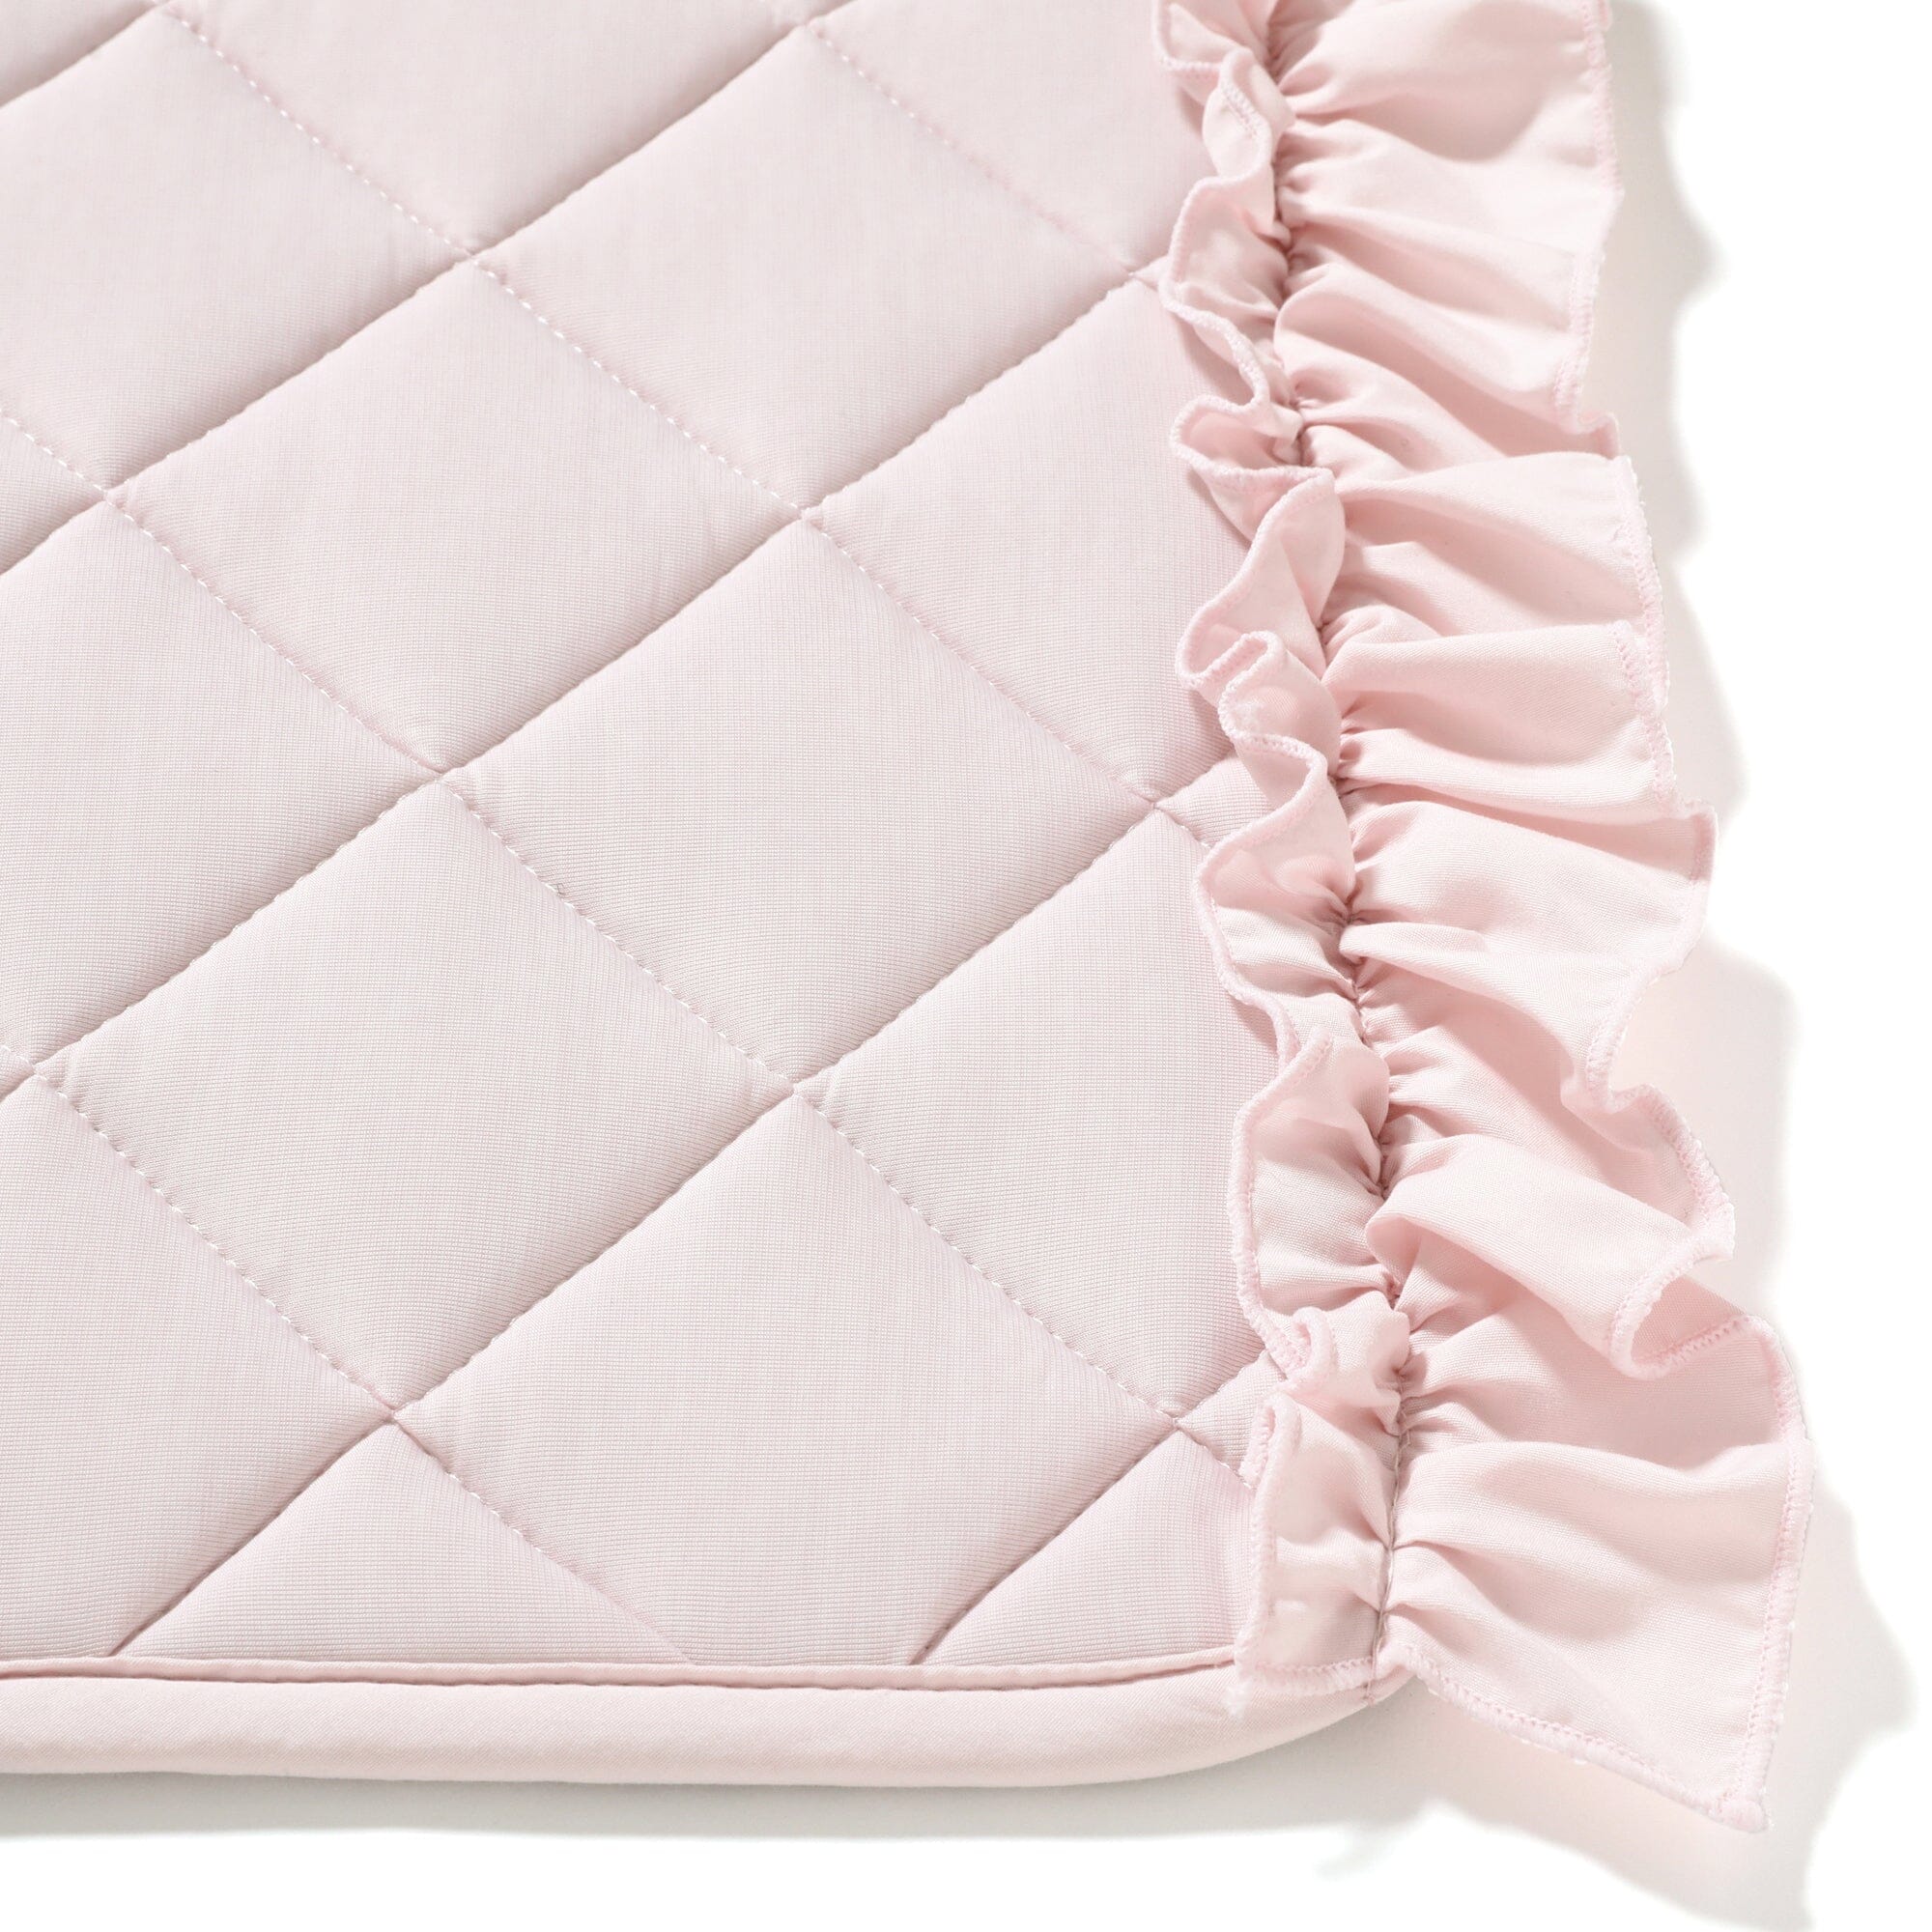 COOL QUILT RUG FRILL  S 1400 X 1000 PINK